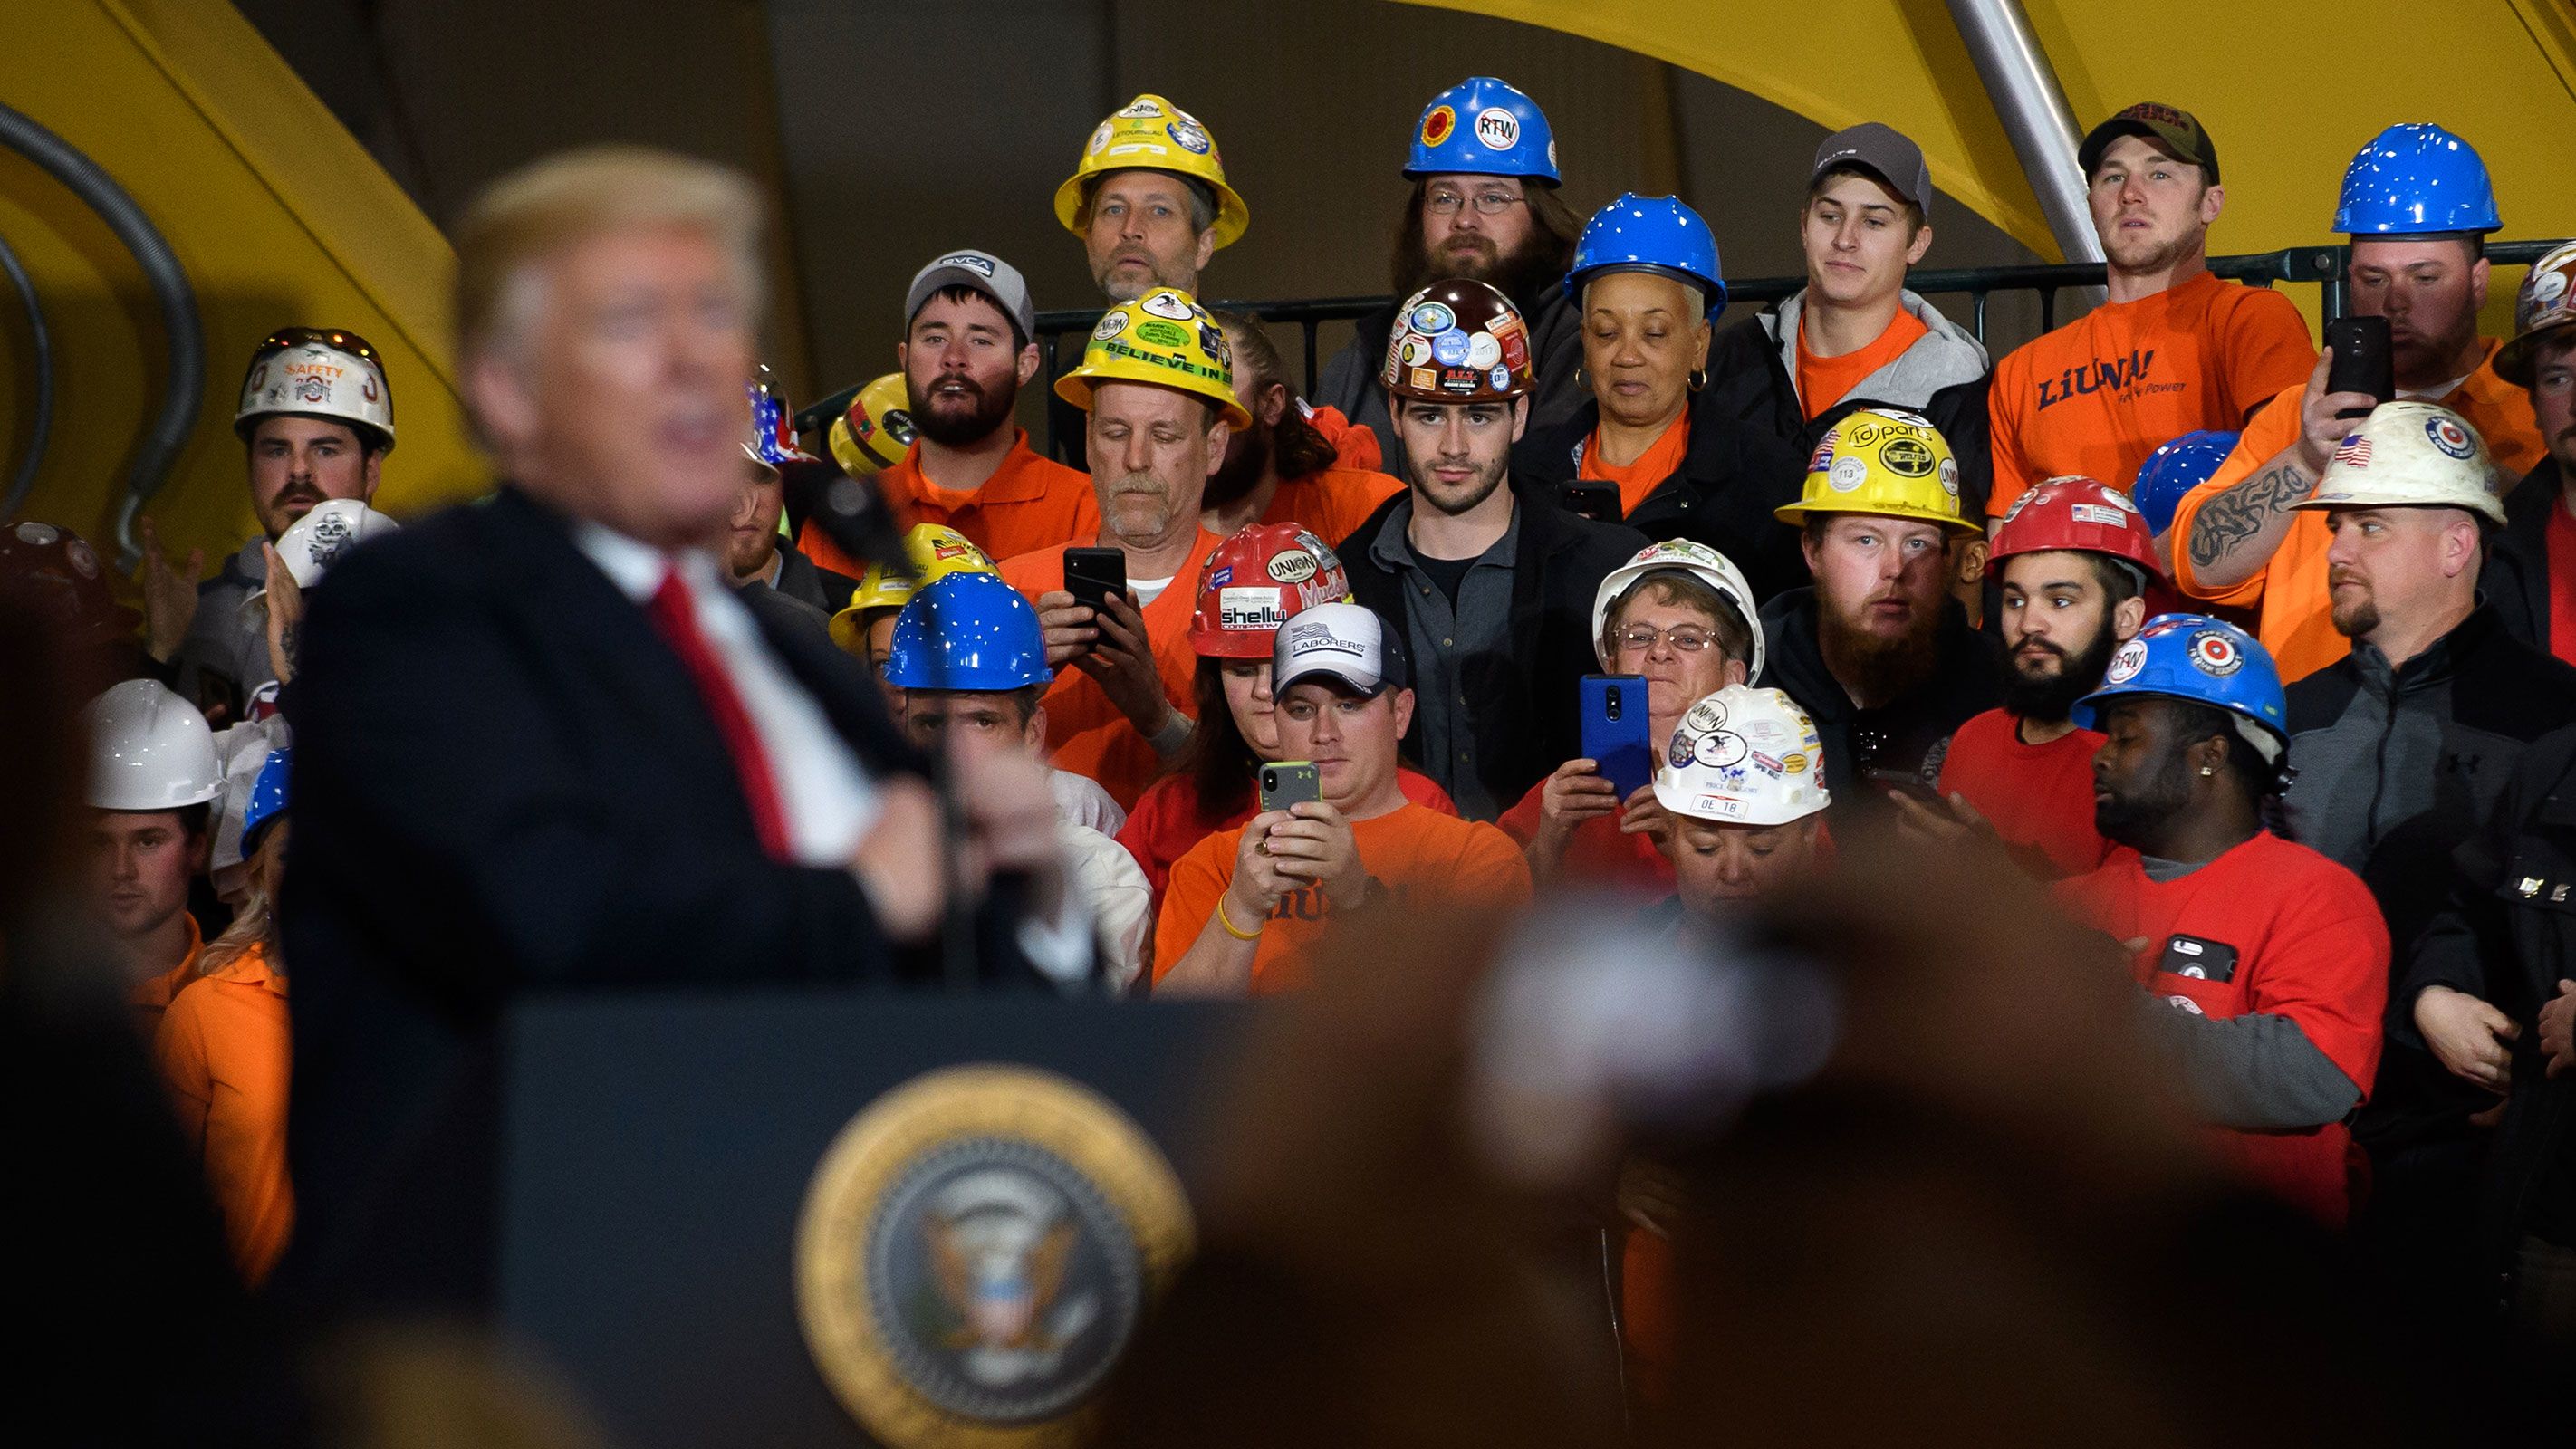 Anti-union record: Trump claims to be pro-worker but not his record